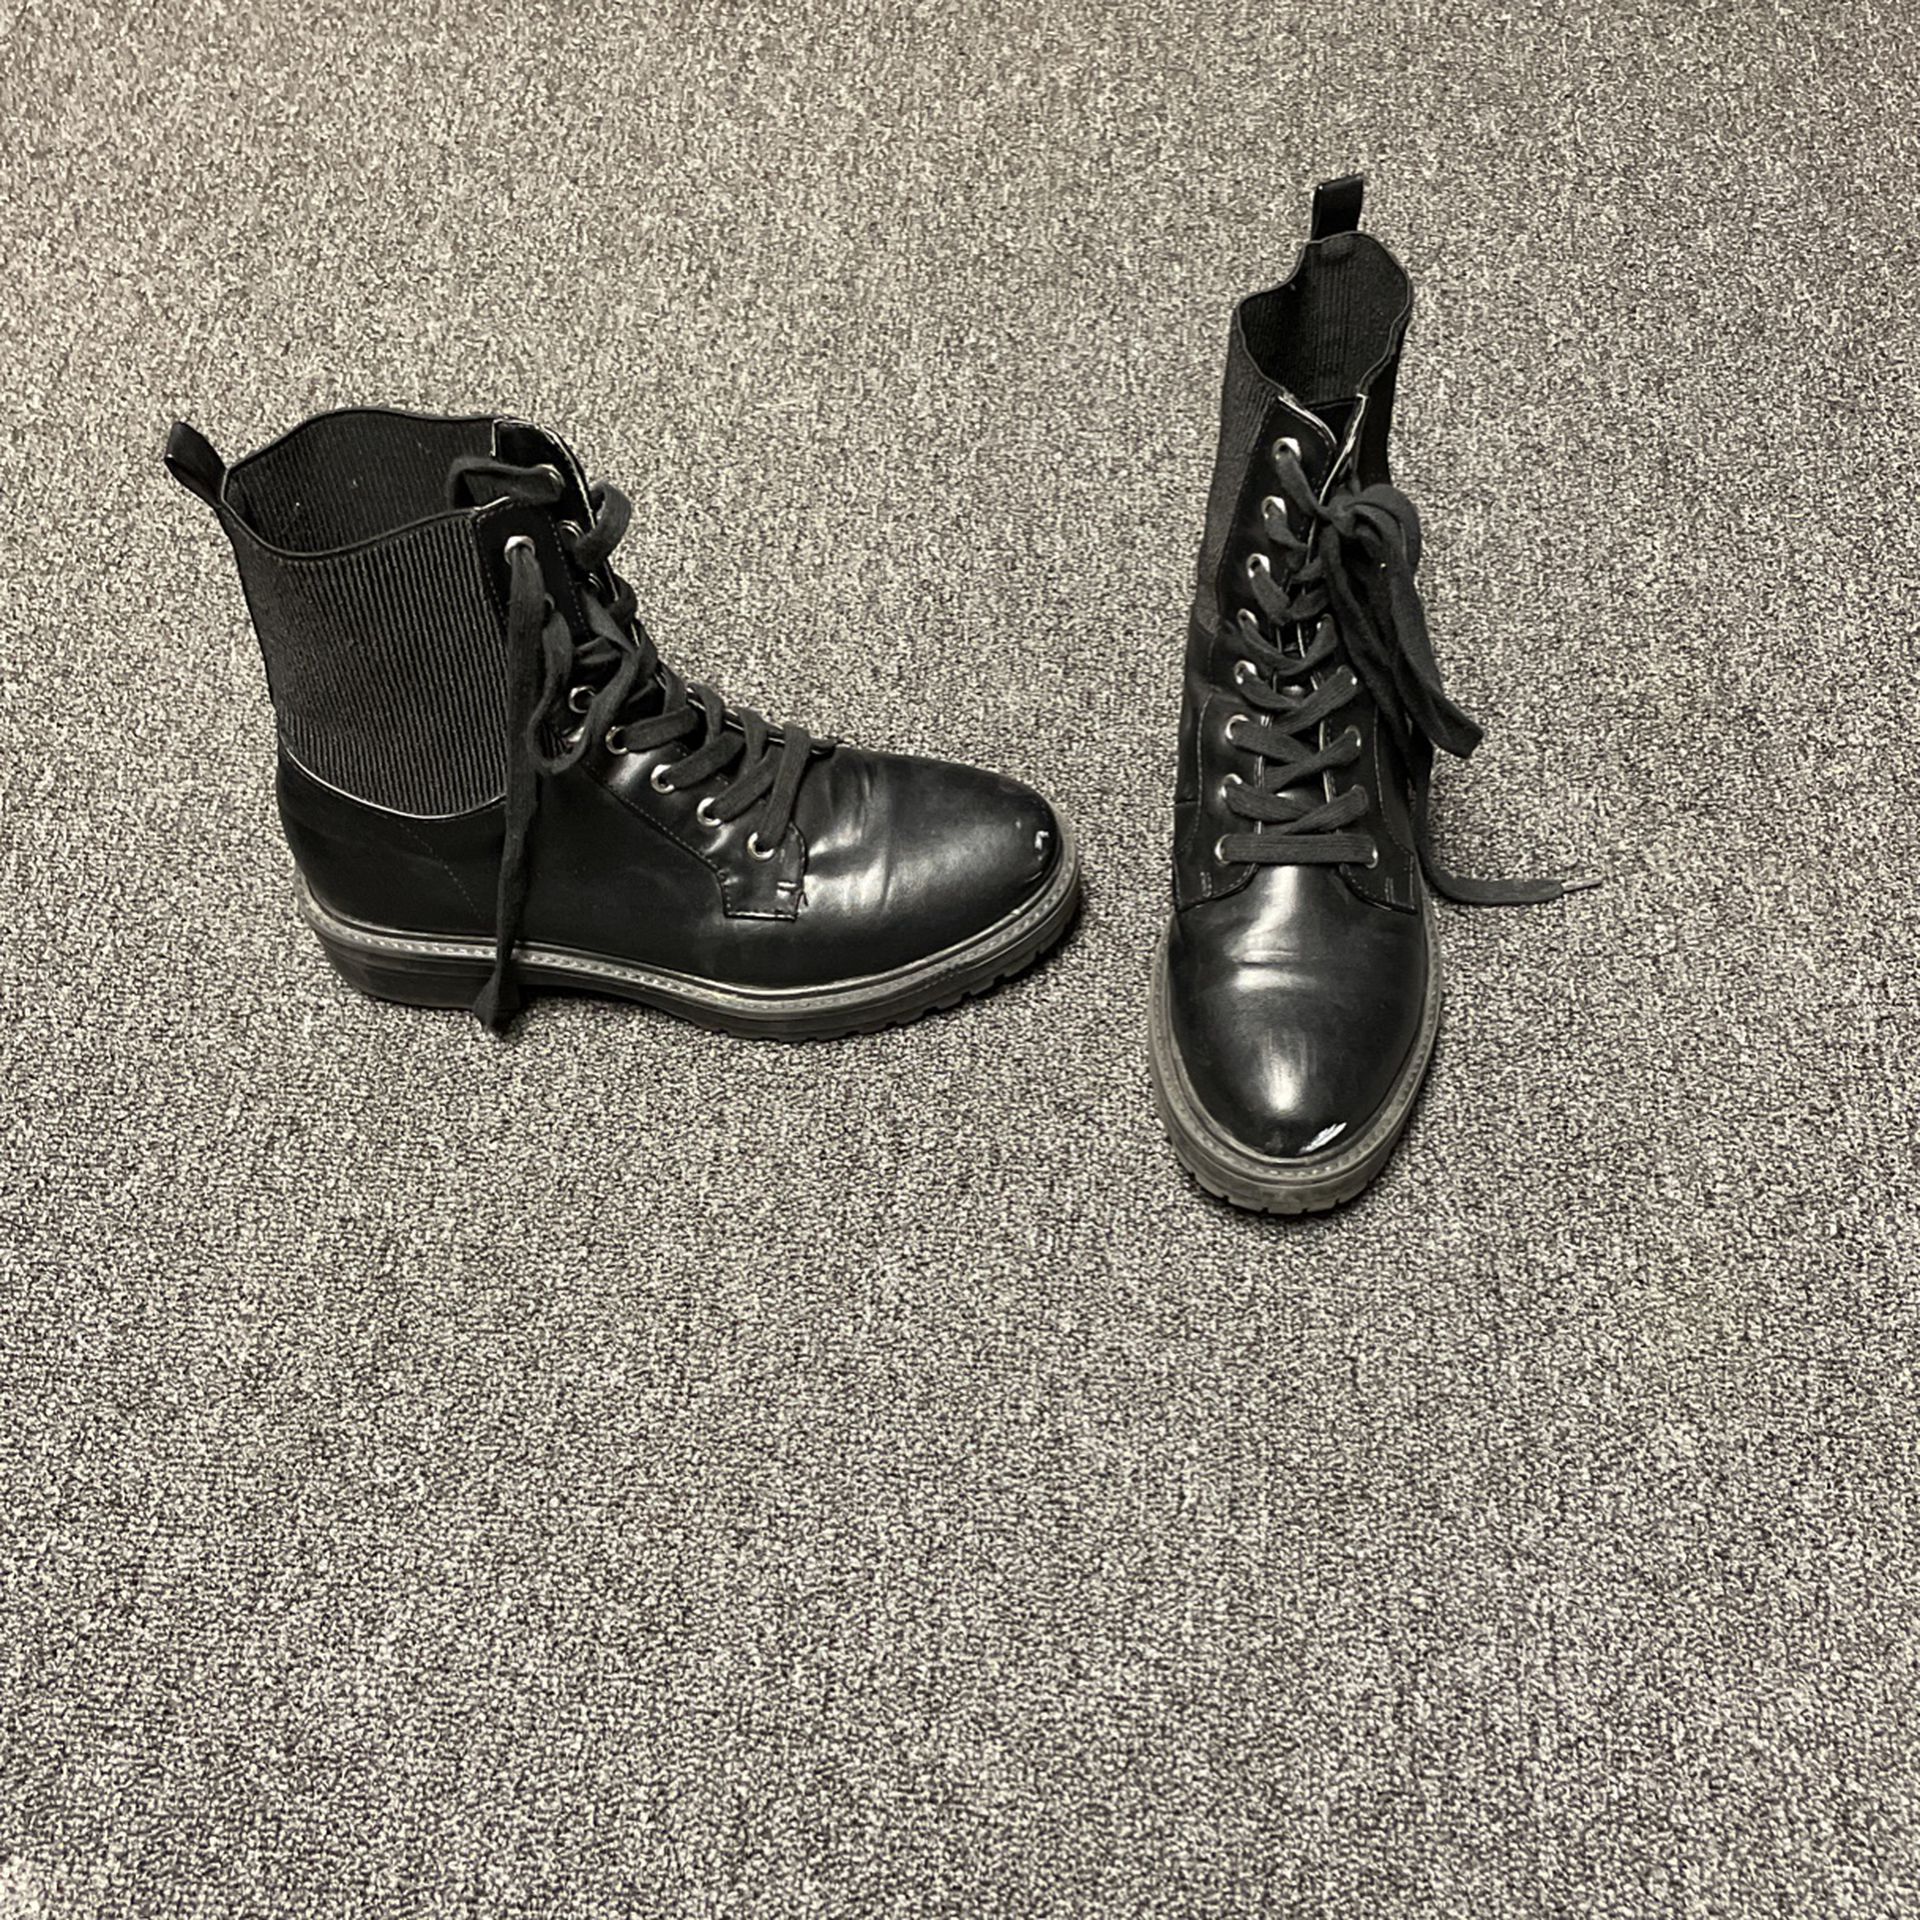 FOREVER 21 BOOTS SIZE 8